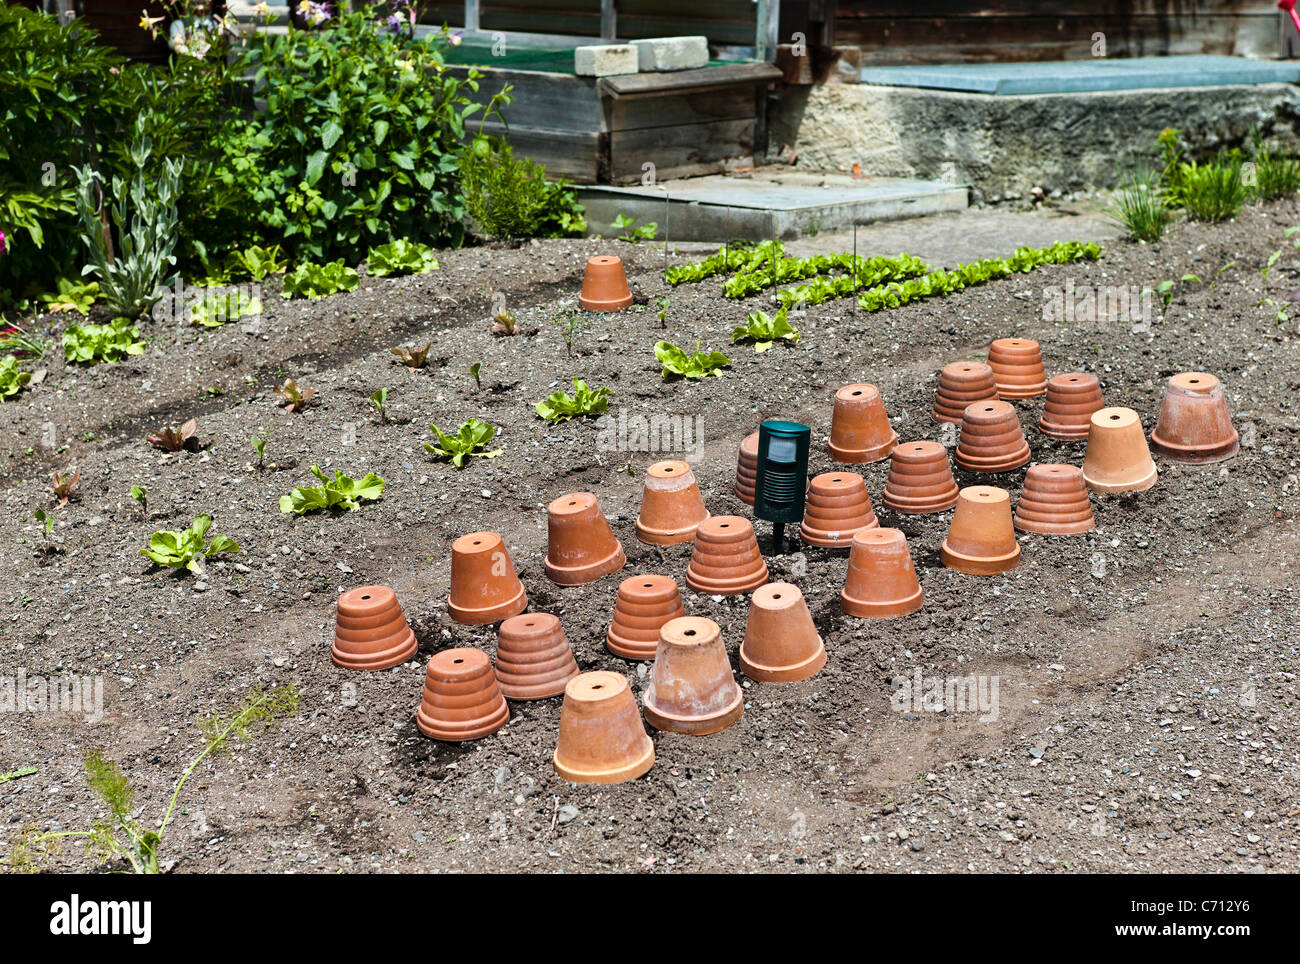 Rows of terracotta flower pots protecting and forcing young vegetable plants in a Swiss garden in June Stock Photo